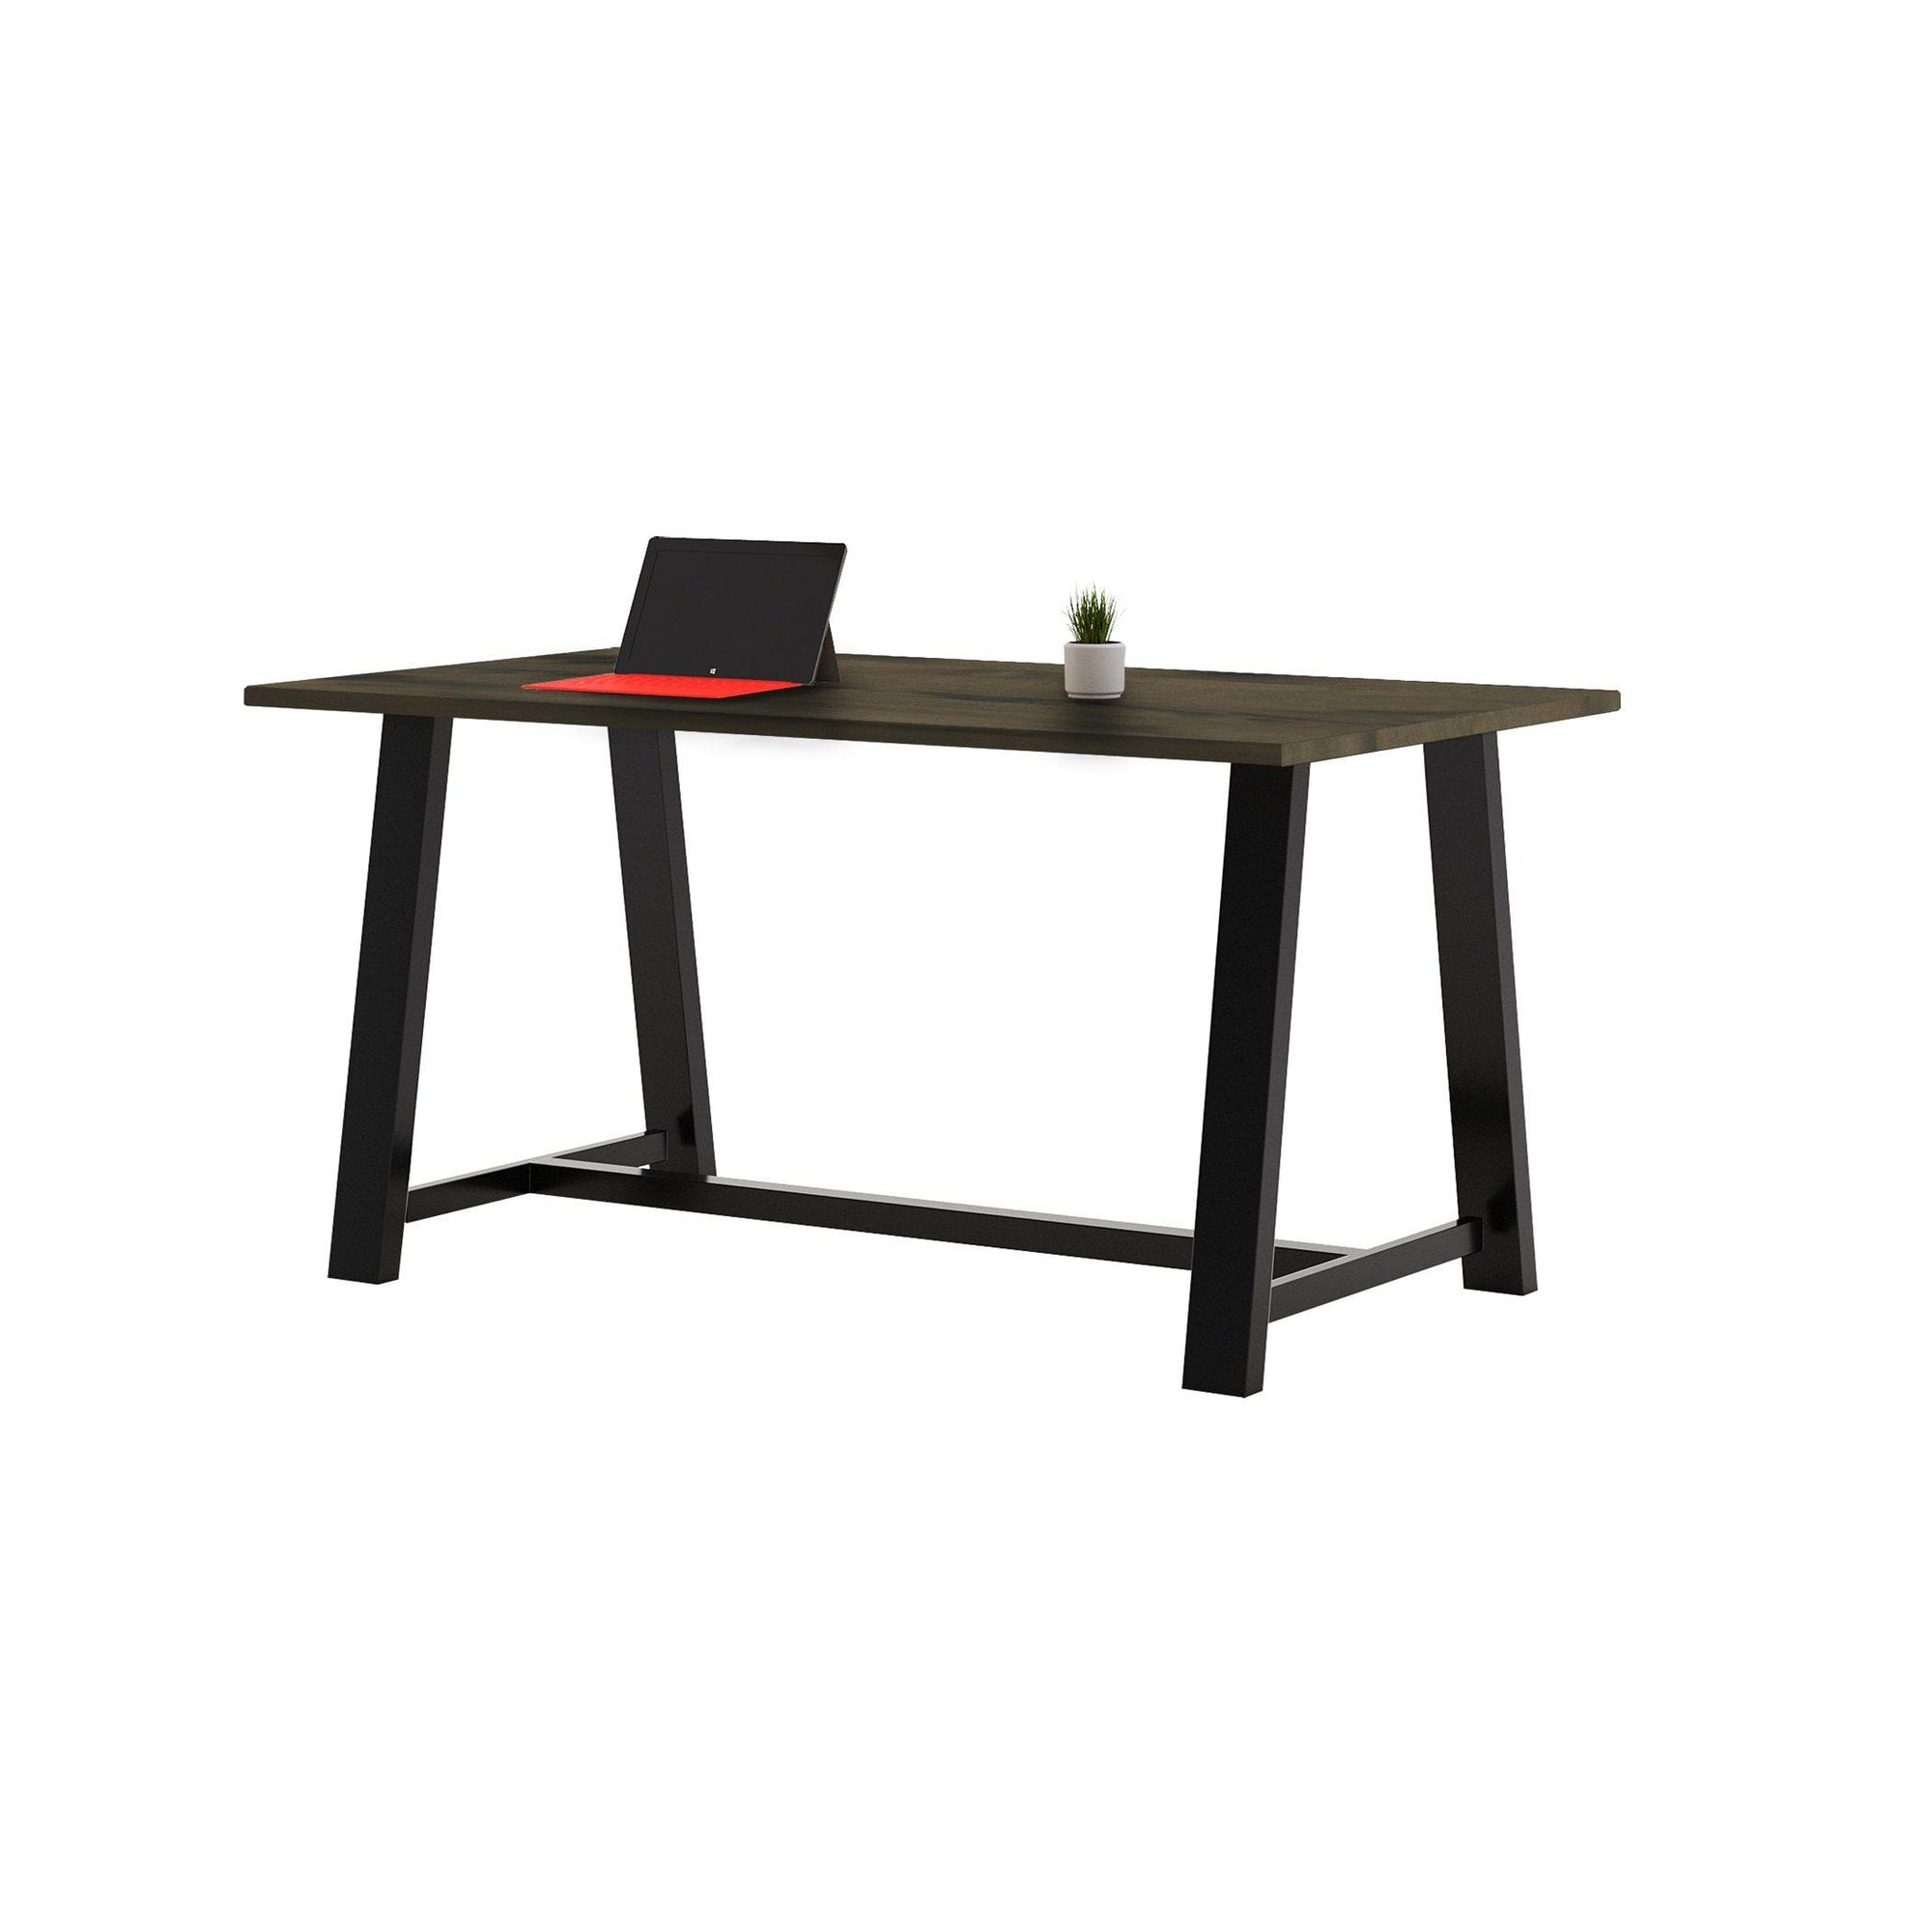 Midtown Table, Counter Height, 42" x 96" x 36"H, High Pressure Laminate Top, 3mm PVC Edge, 72" Base